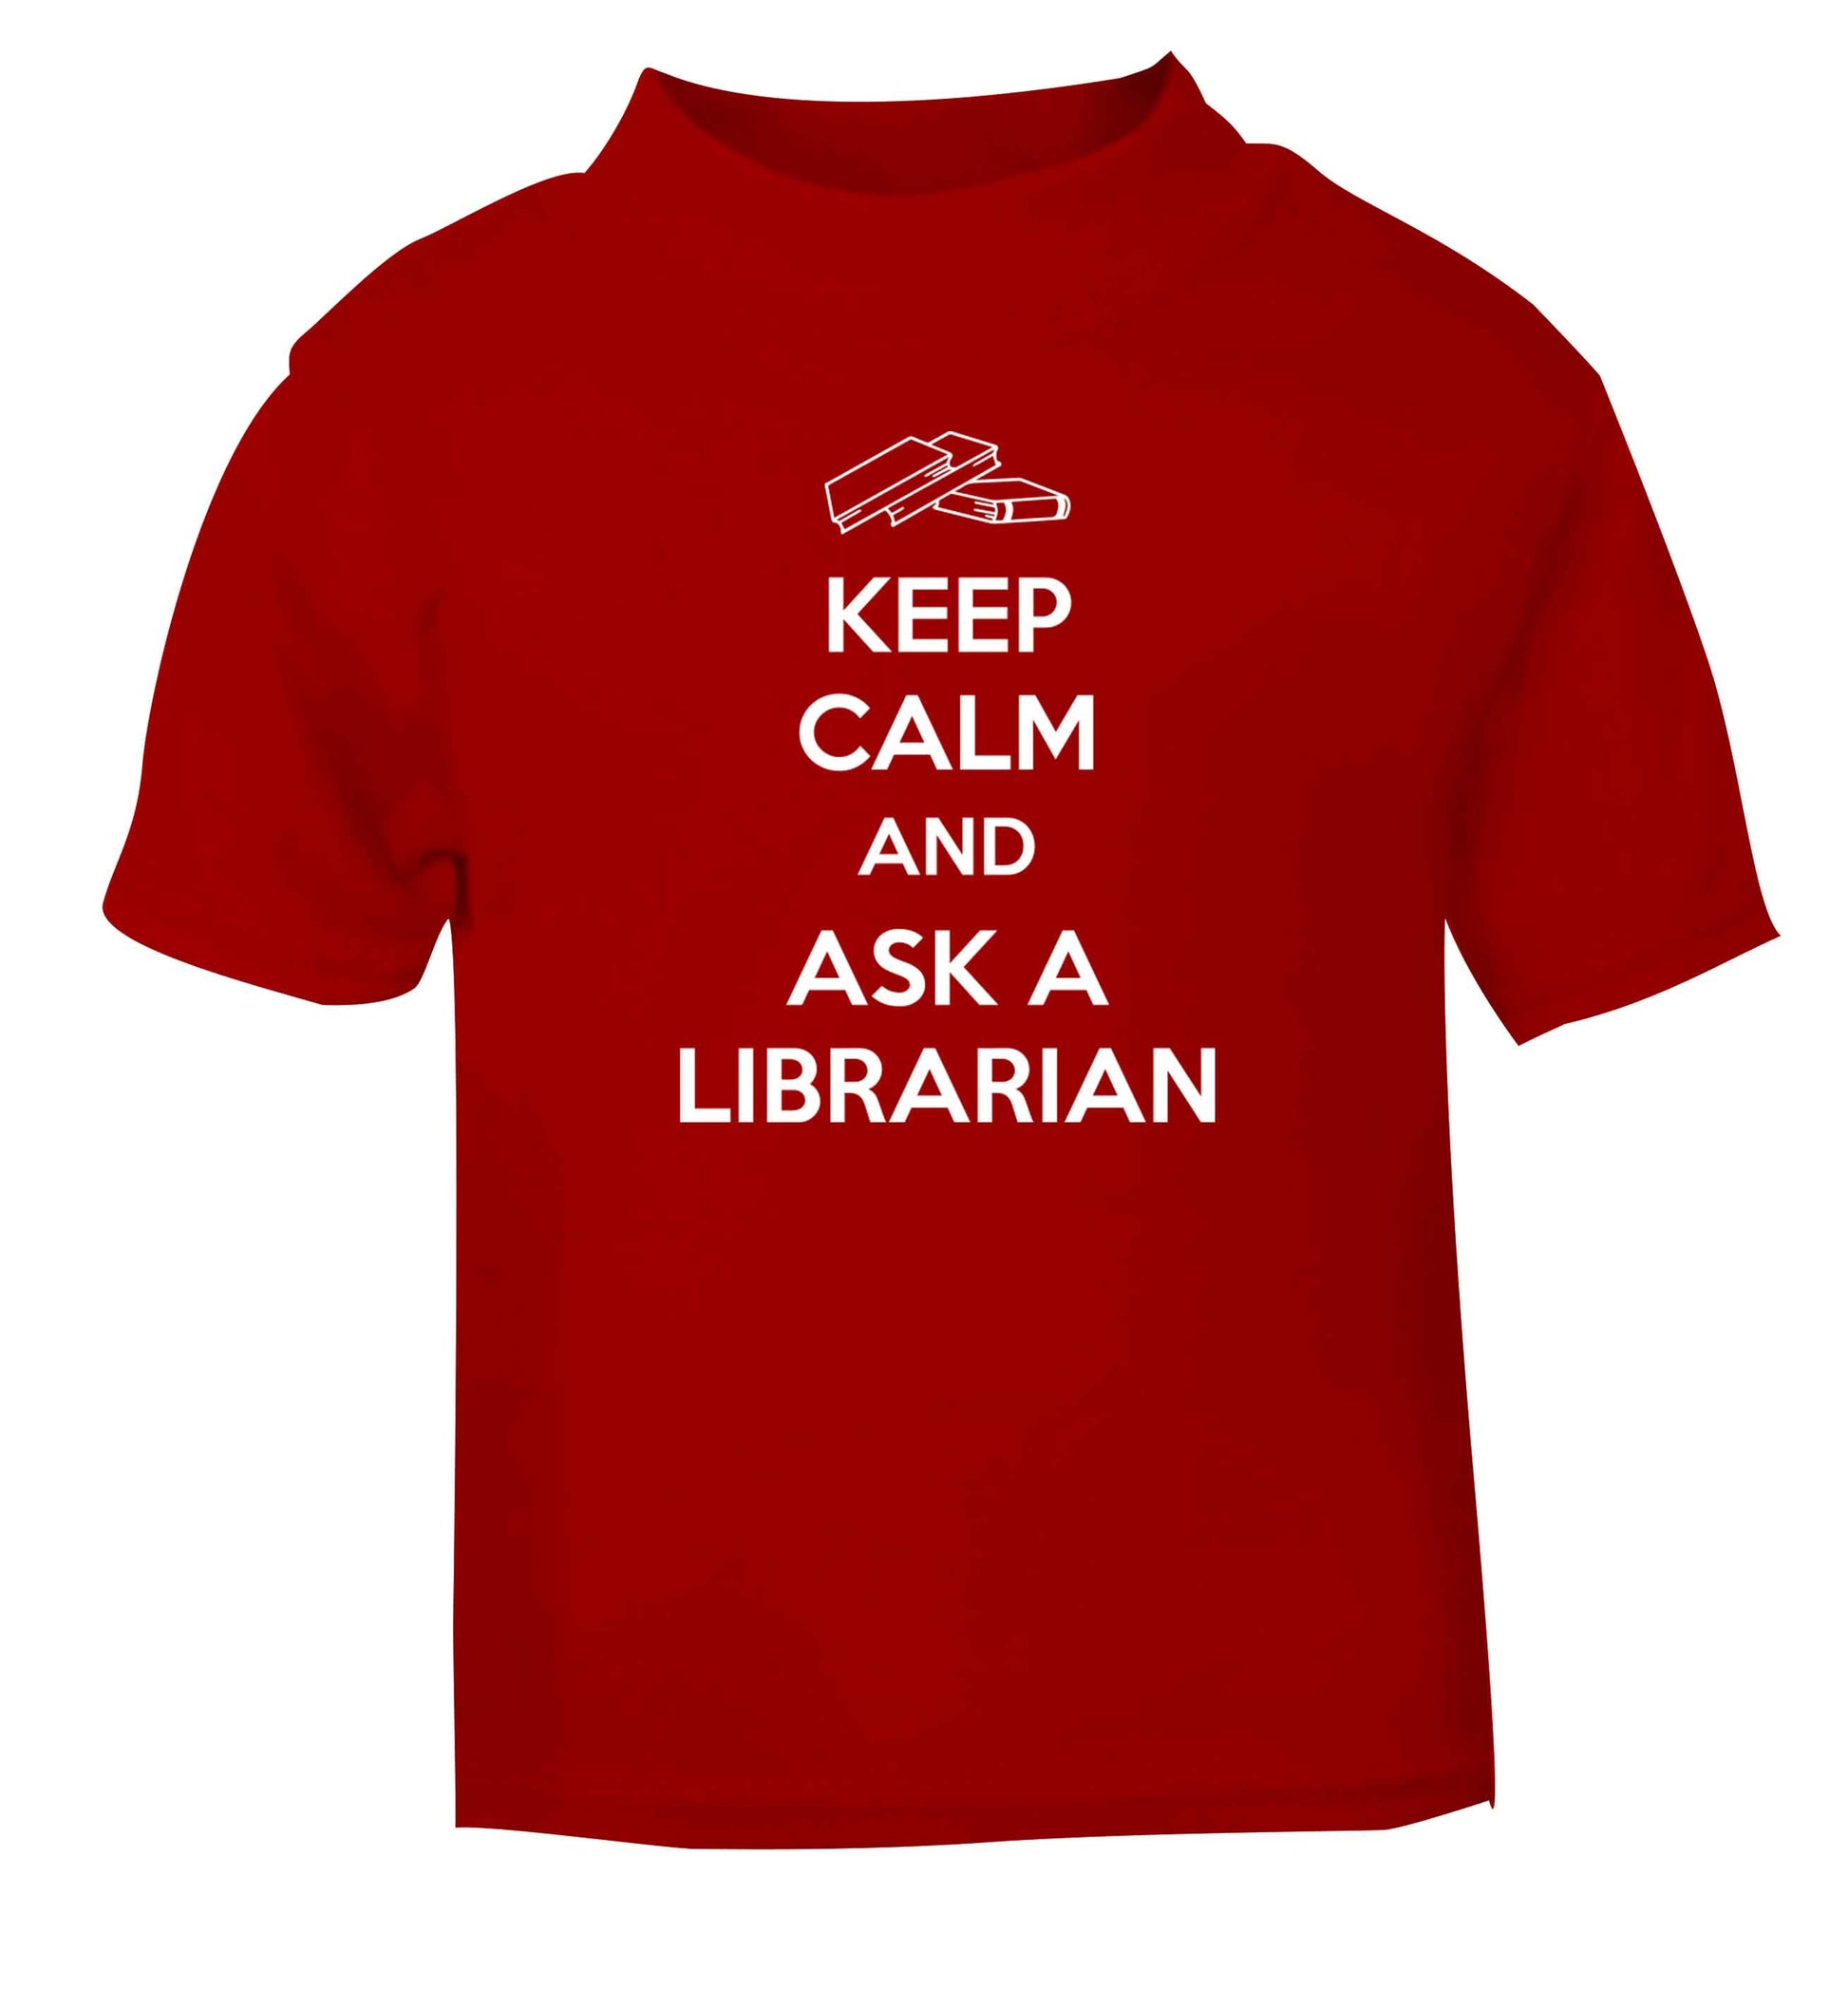 Keep calm and ask a librarian red Baby Toddler Tshirt 2 Years